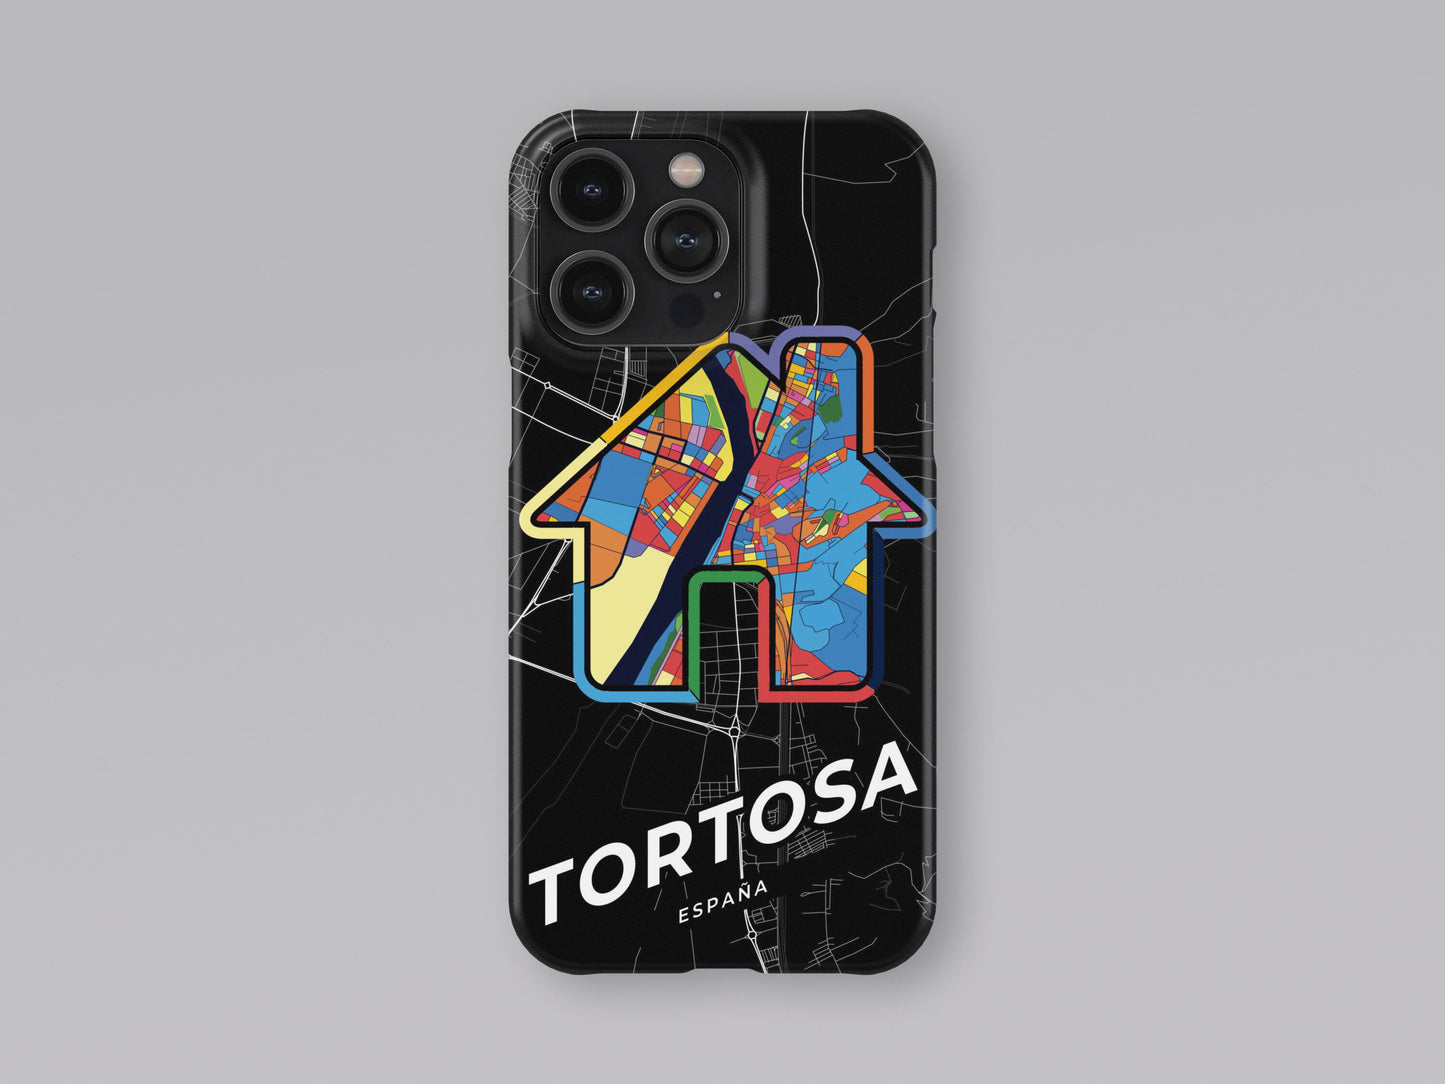 Tortosa Spain slim phone case with colorful icon. Birthday, wedding or housewarming gift. Couple match cases. 3